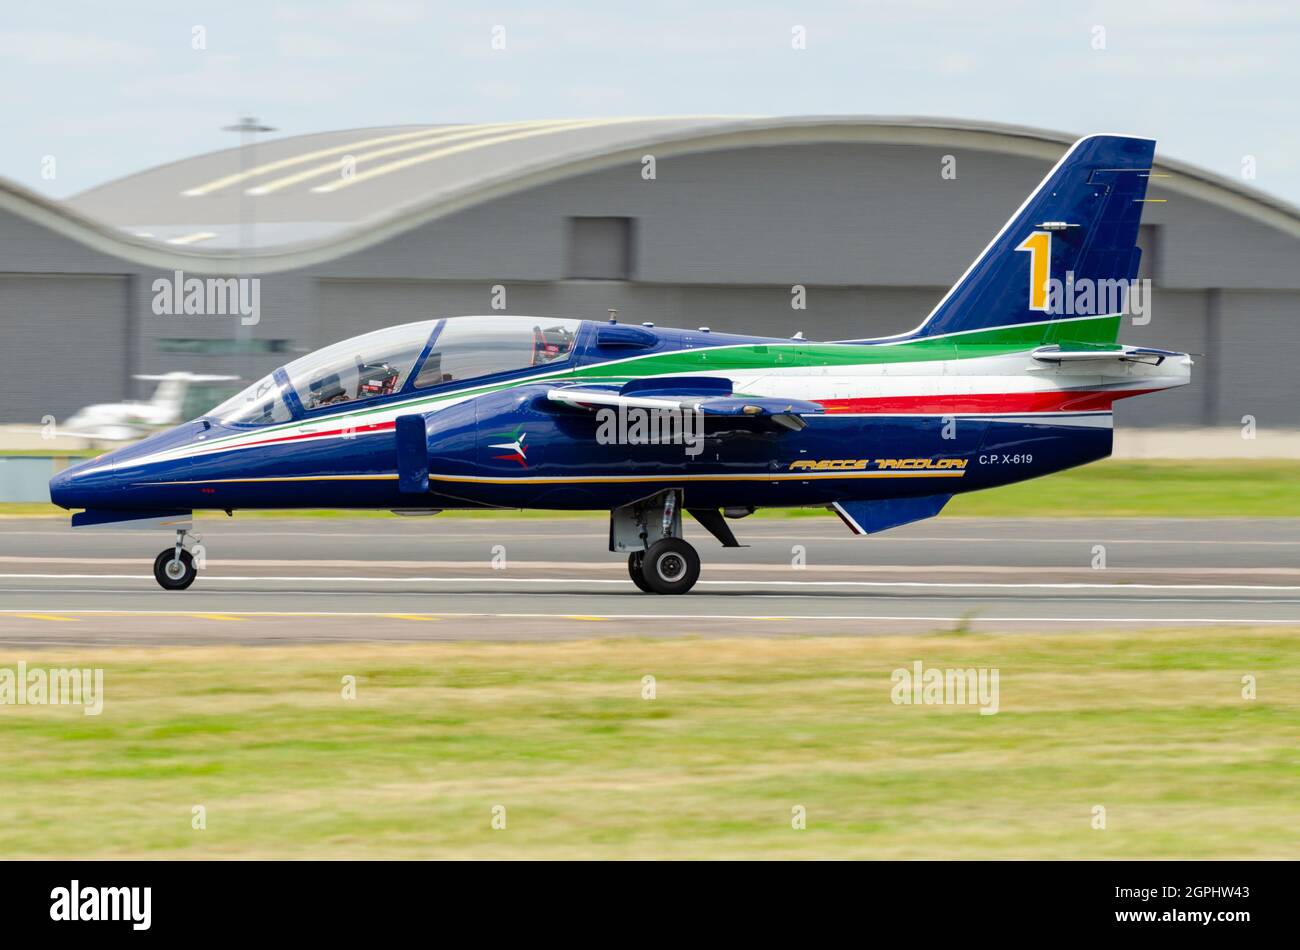 Aermacchi M 345 advanced military jet trainer plane serial CPX619 in Frecce Tricolori colours as number 1. Italian Air Force training airplane Stock Photo